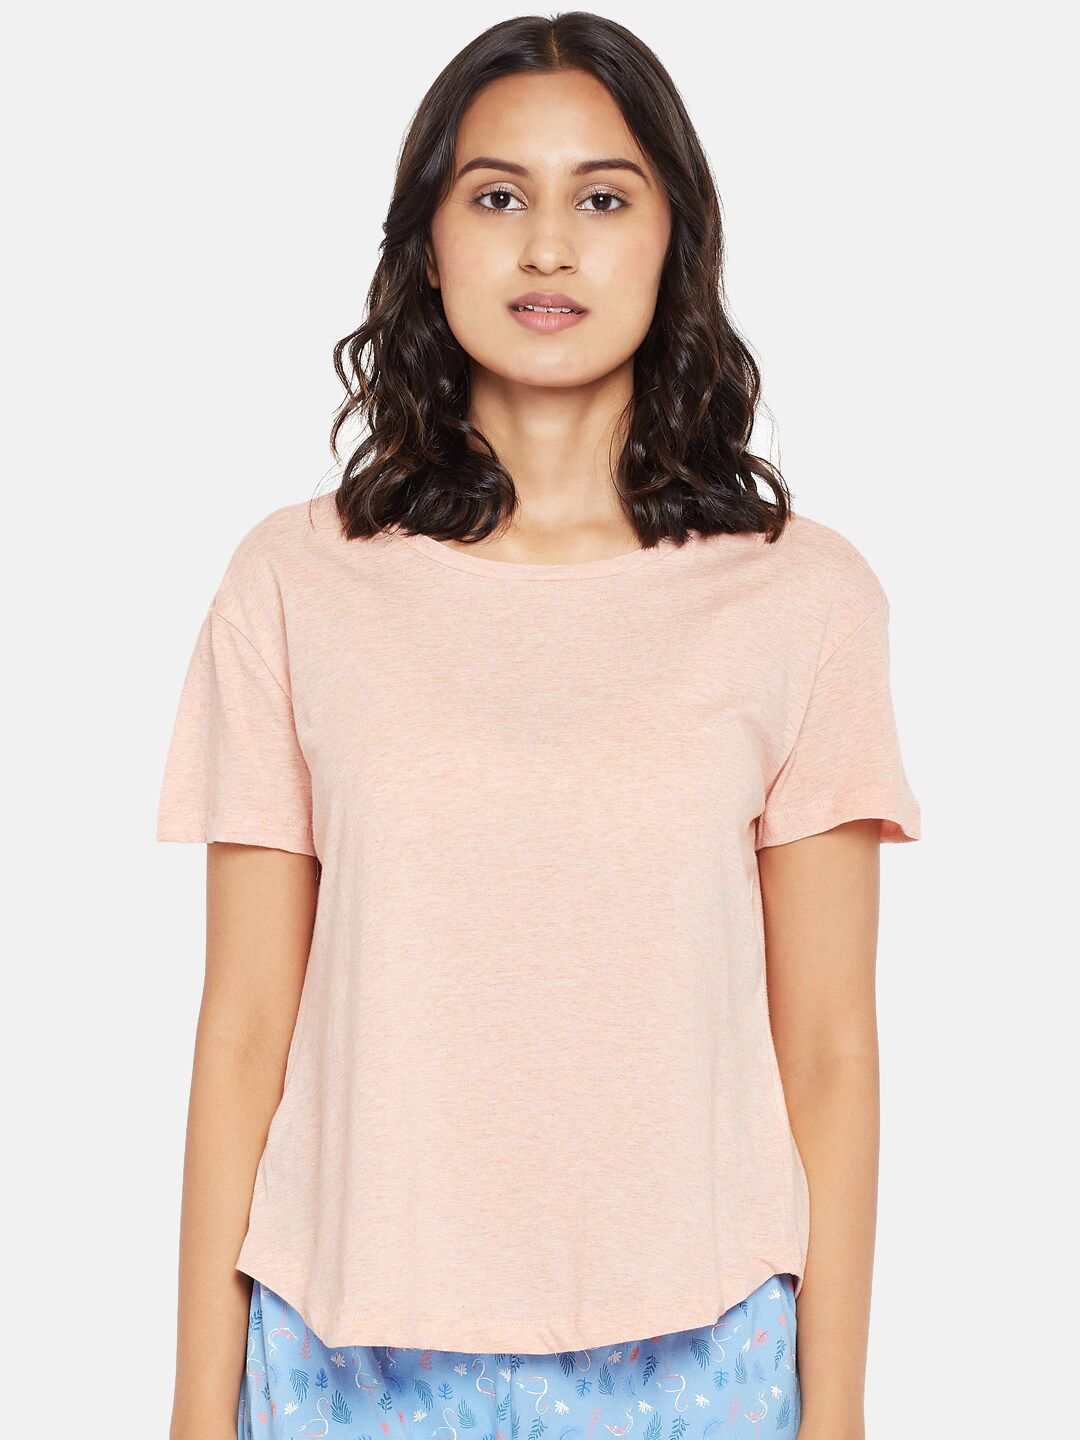 Dreamz by Pantaloons Women Pink Solid Lounge T-shirt Price in India